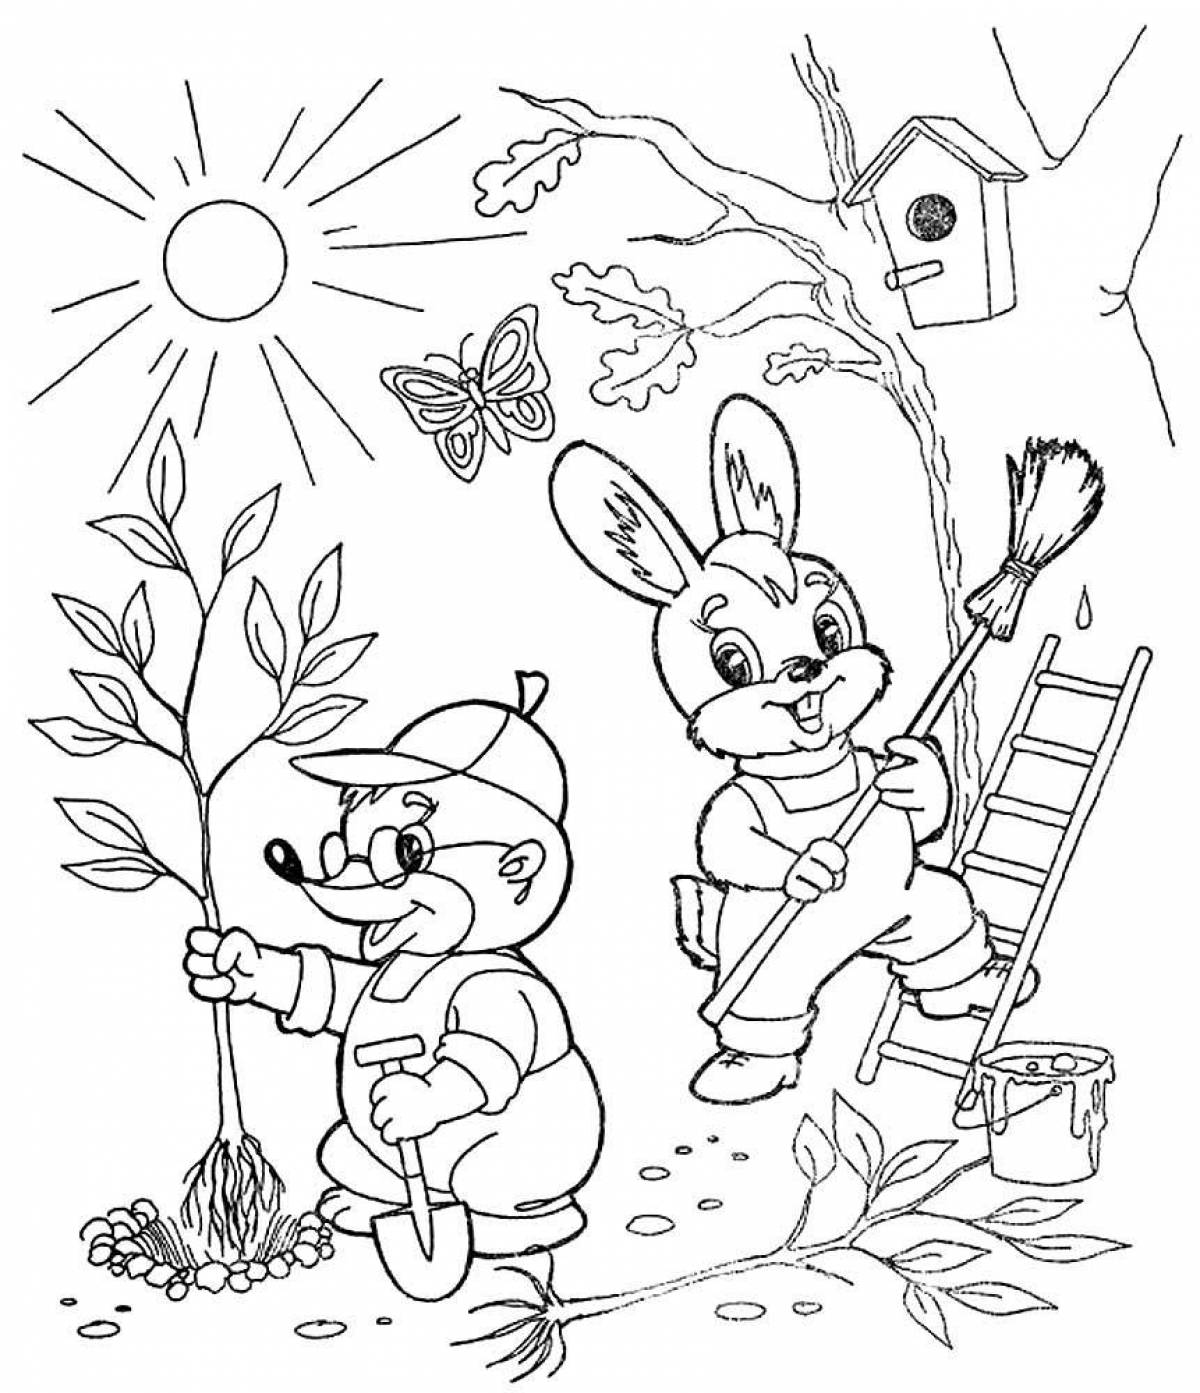 Coloring page edge of vibrant babys